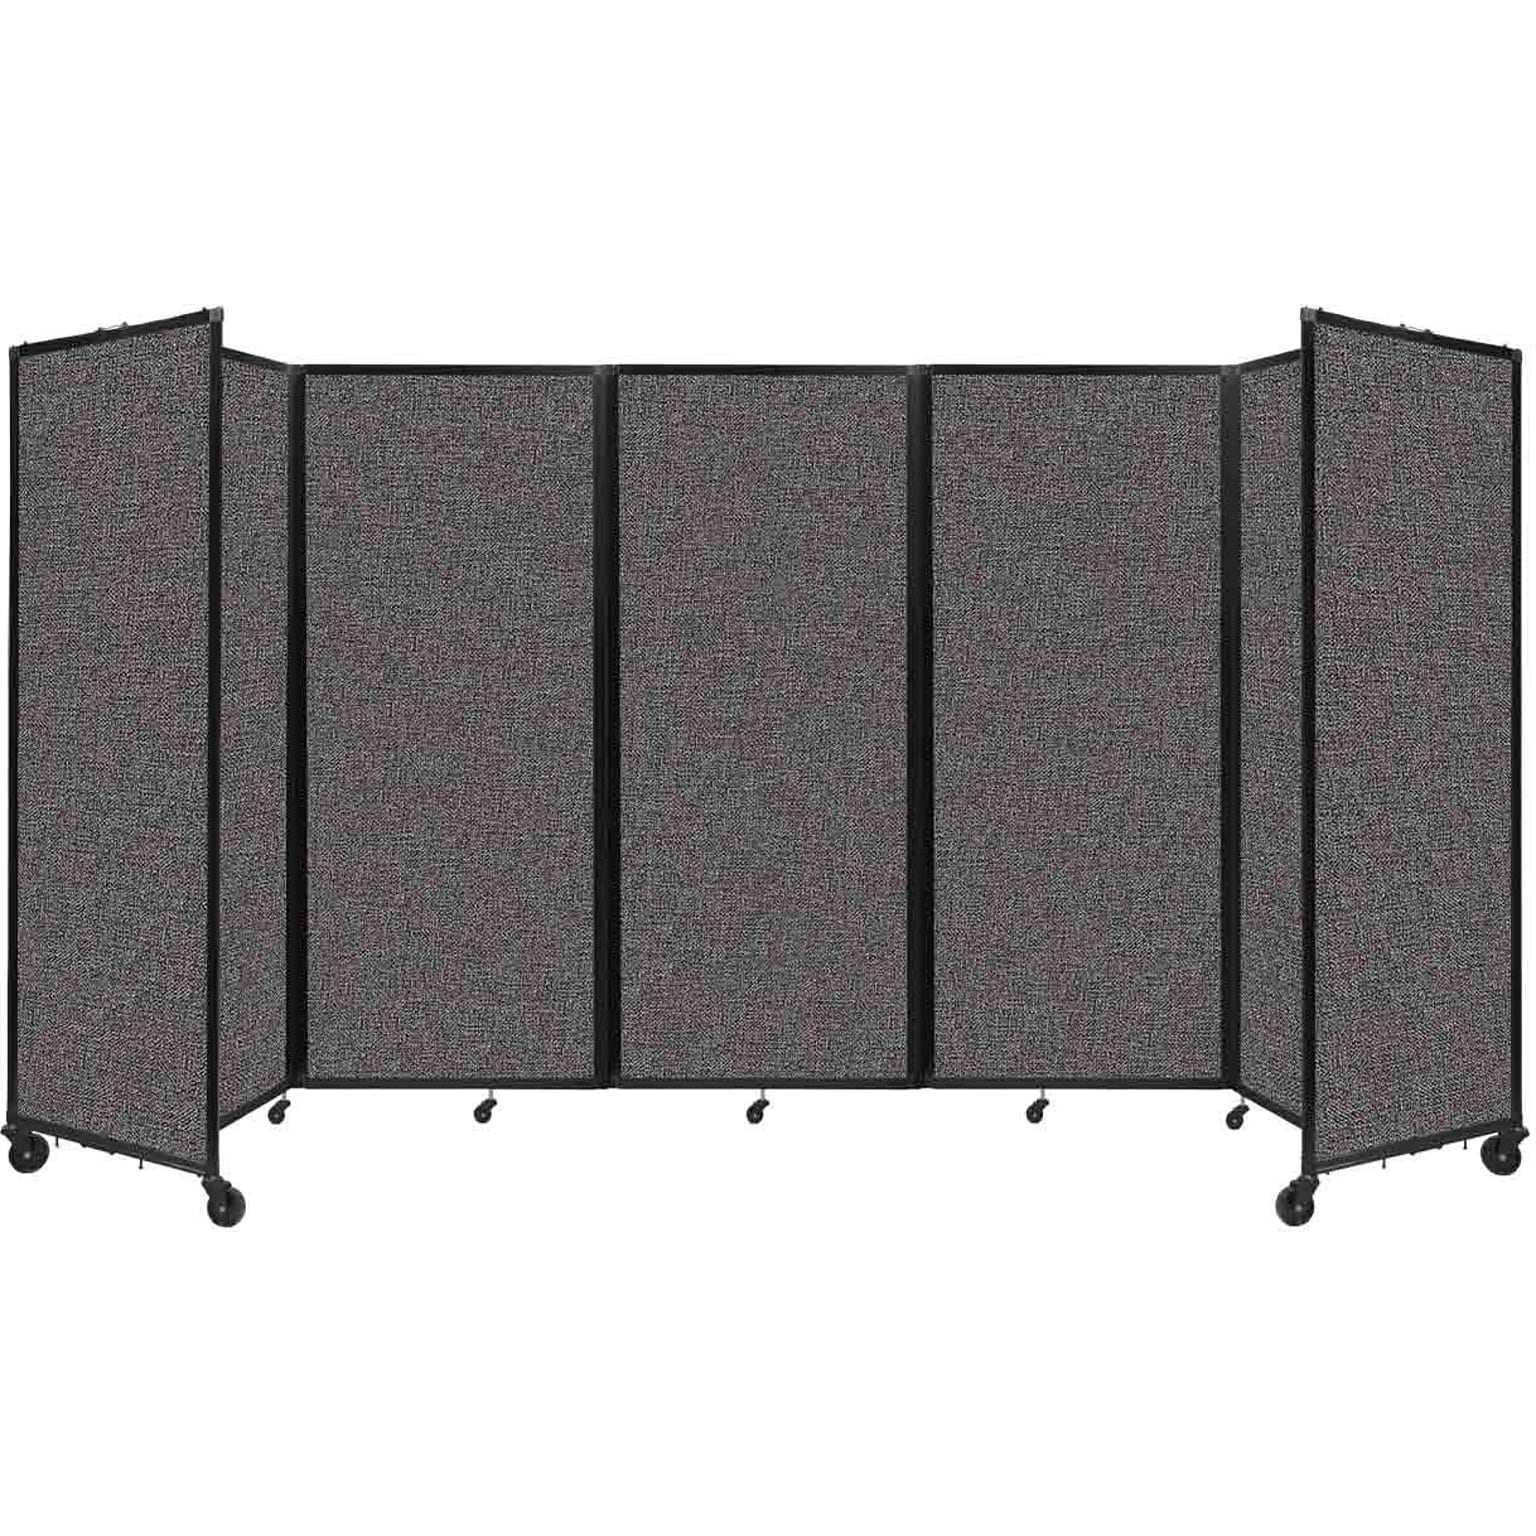 Versare The Room Divider 360 Freestanding Folding Portable Partition, 82H x 168W, Charcoal Gray Fabric (1182507)